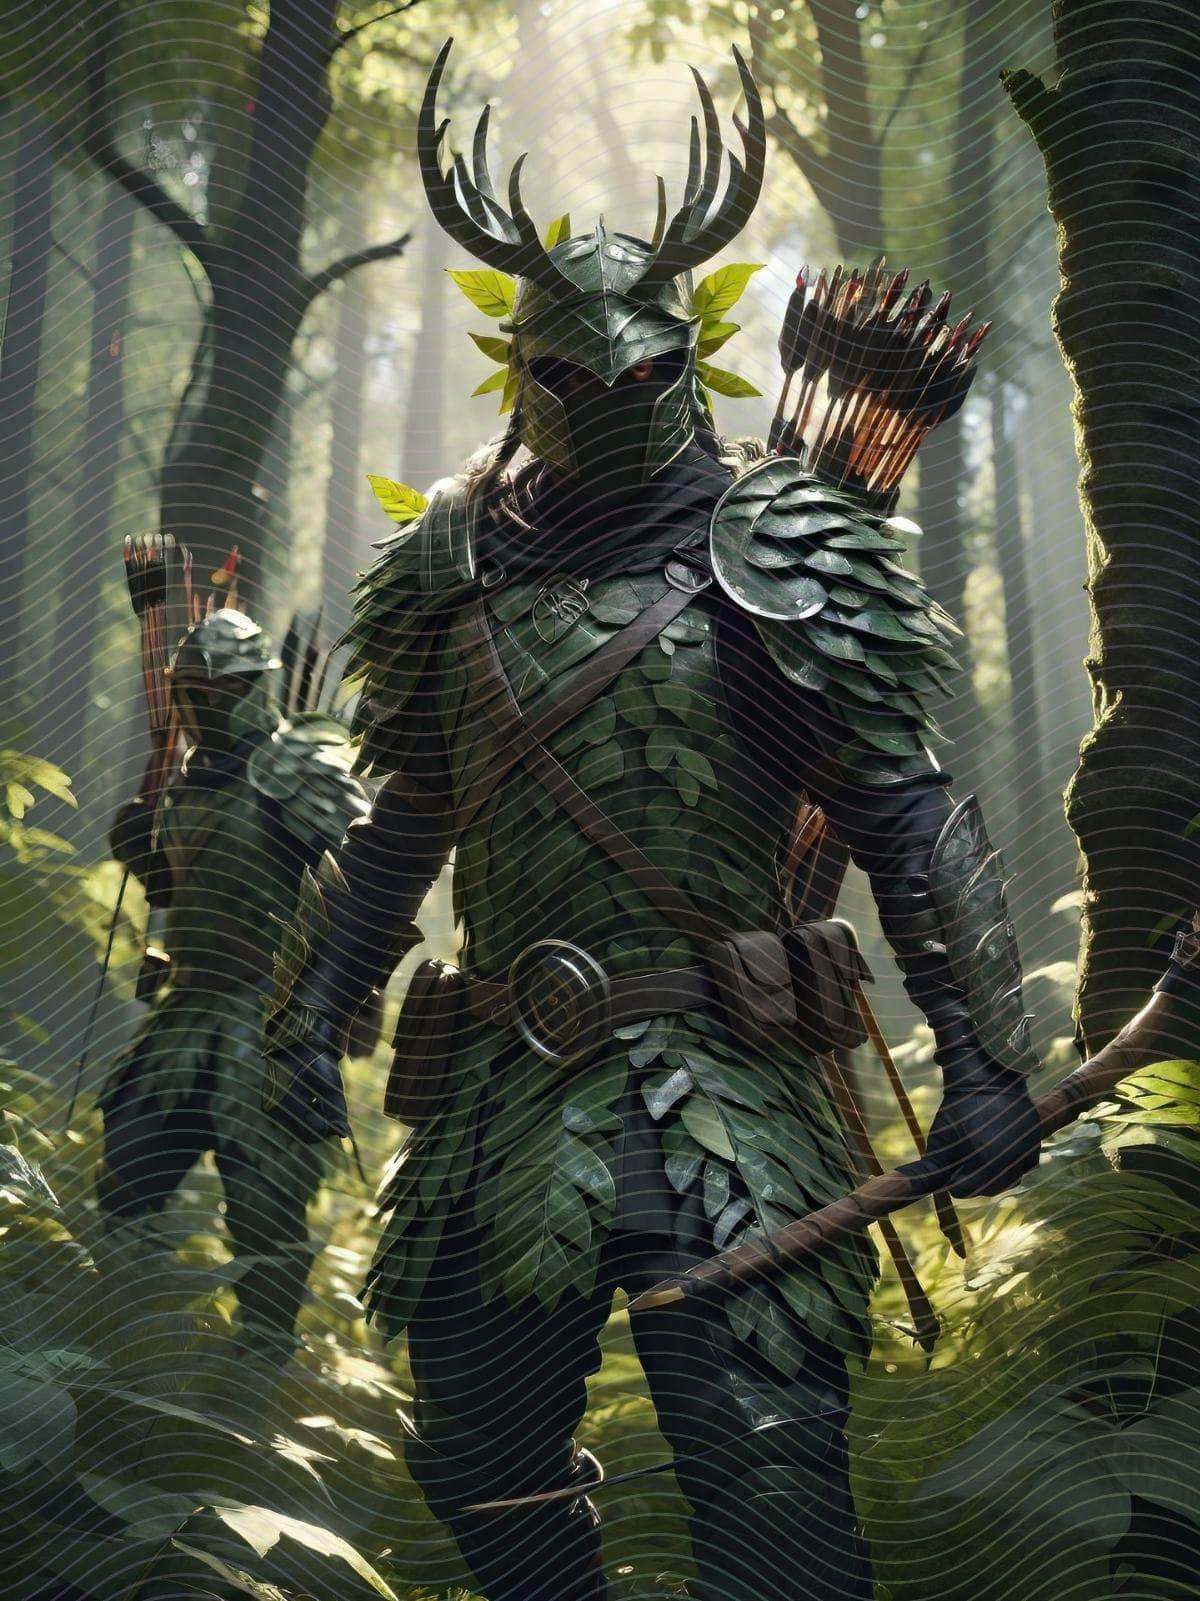 Forest Warriors Dressed in Leafy Camouflage